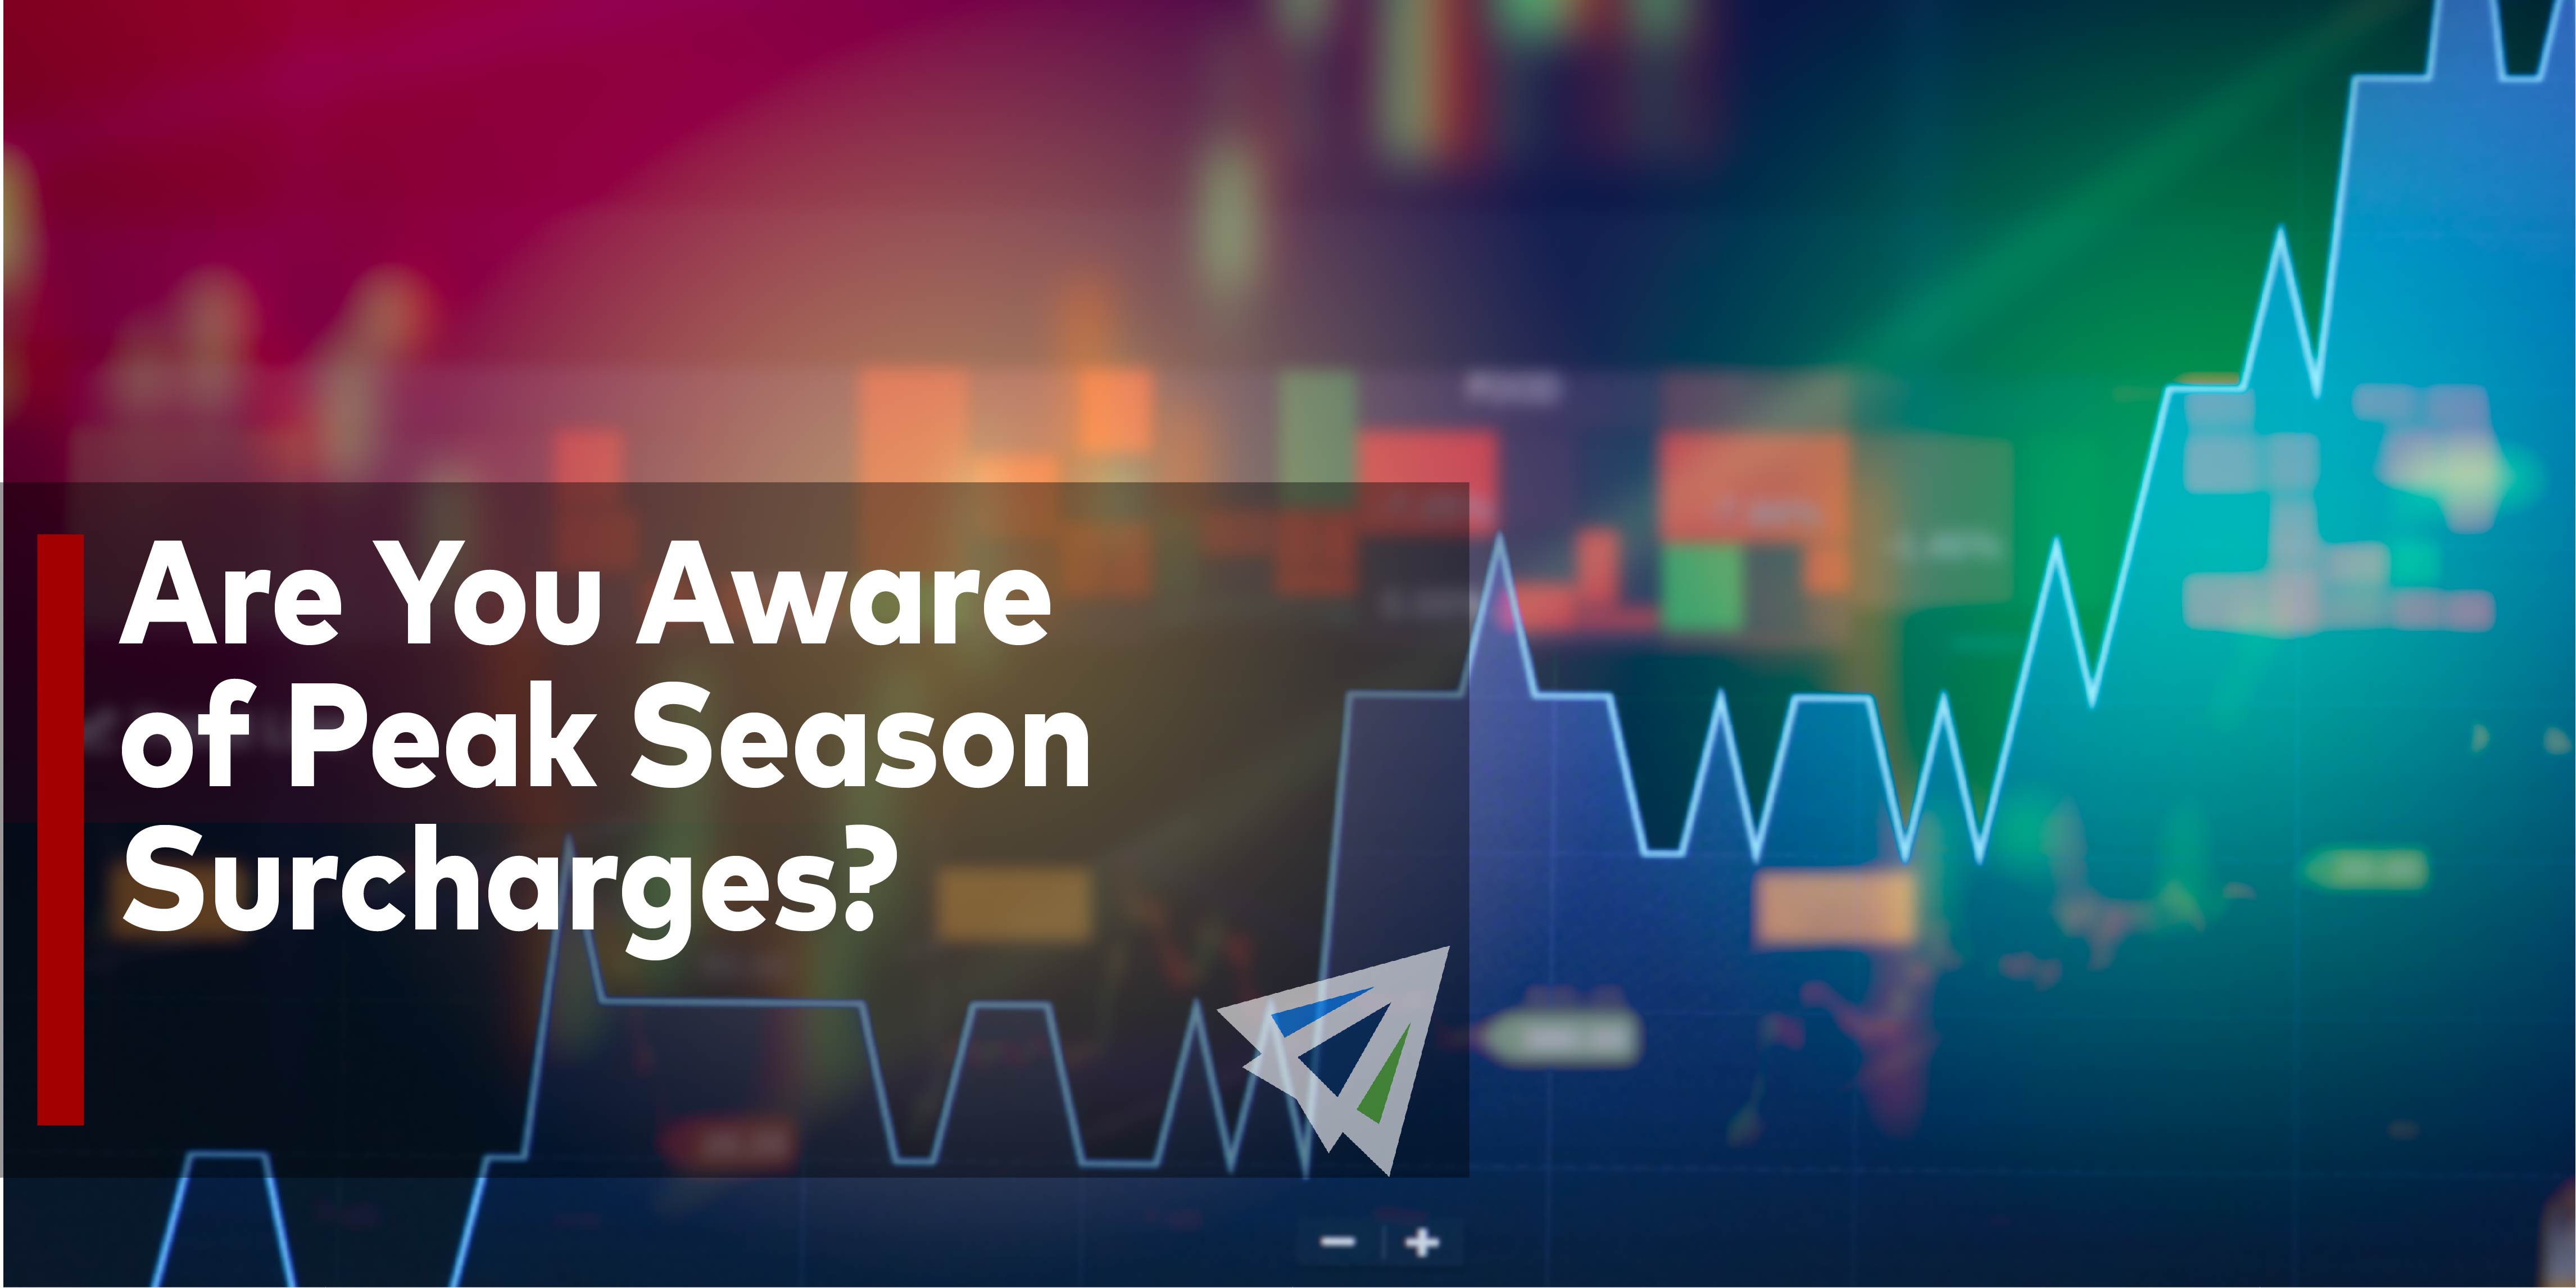 Are You Aware of Peak Season Surcharges